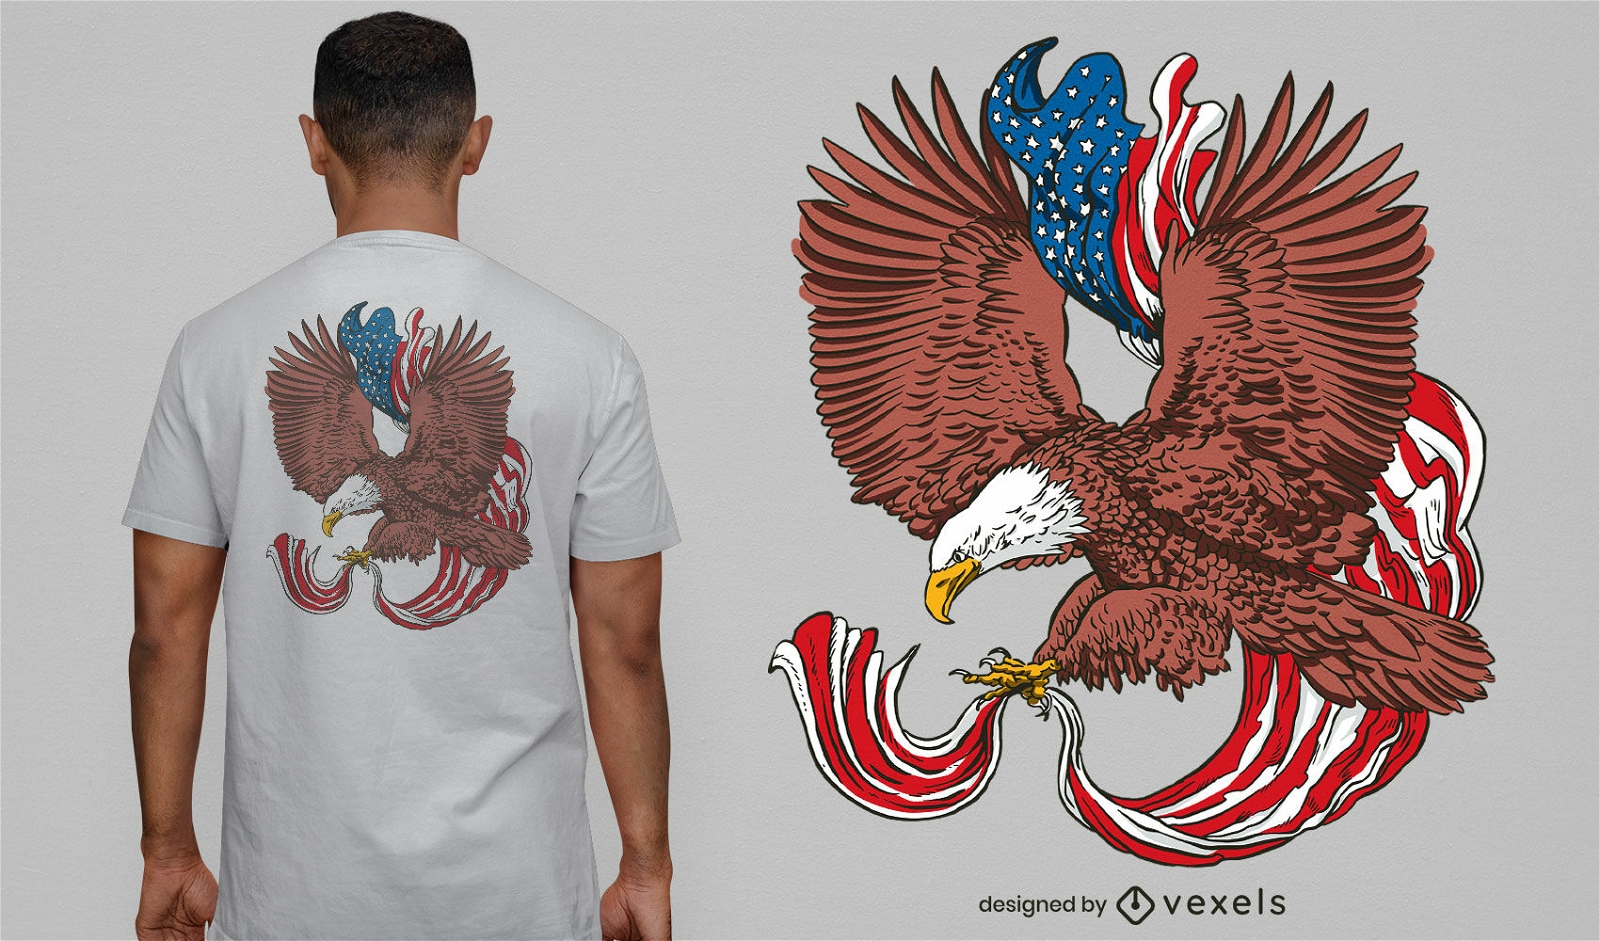 Awesome American eagle t-shirt design